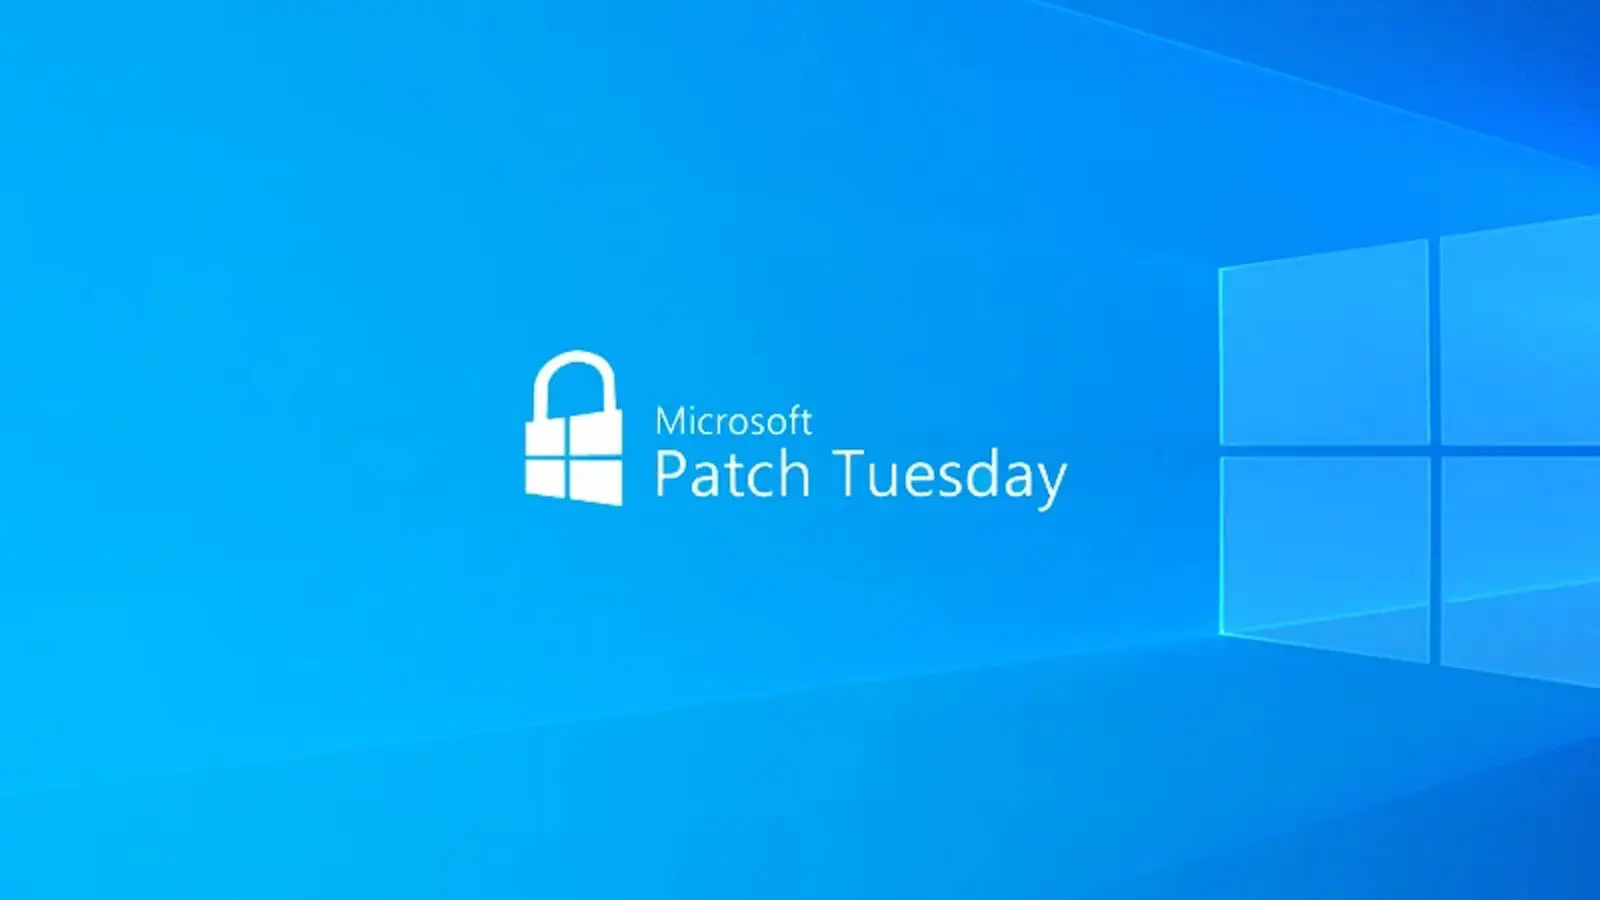 Microsoft December 2022 Patch Tuesday fixes 2 zero-days, 49 flaws